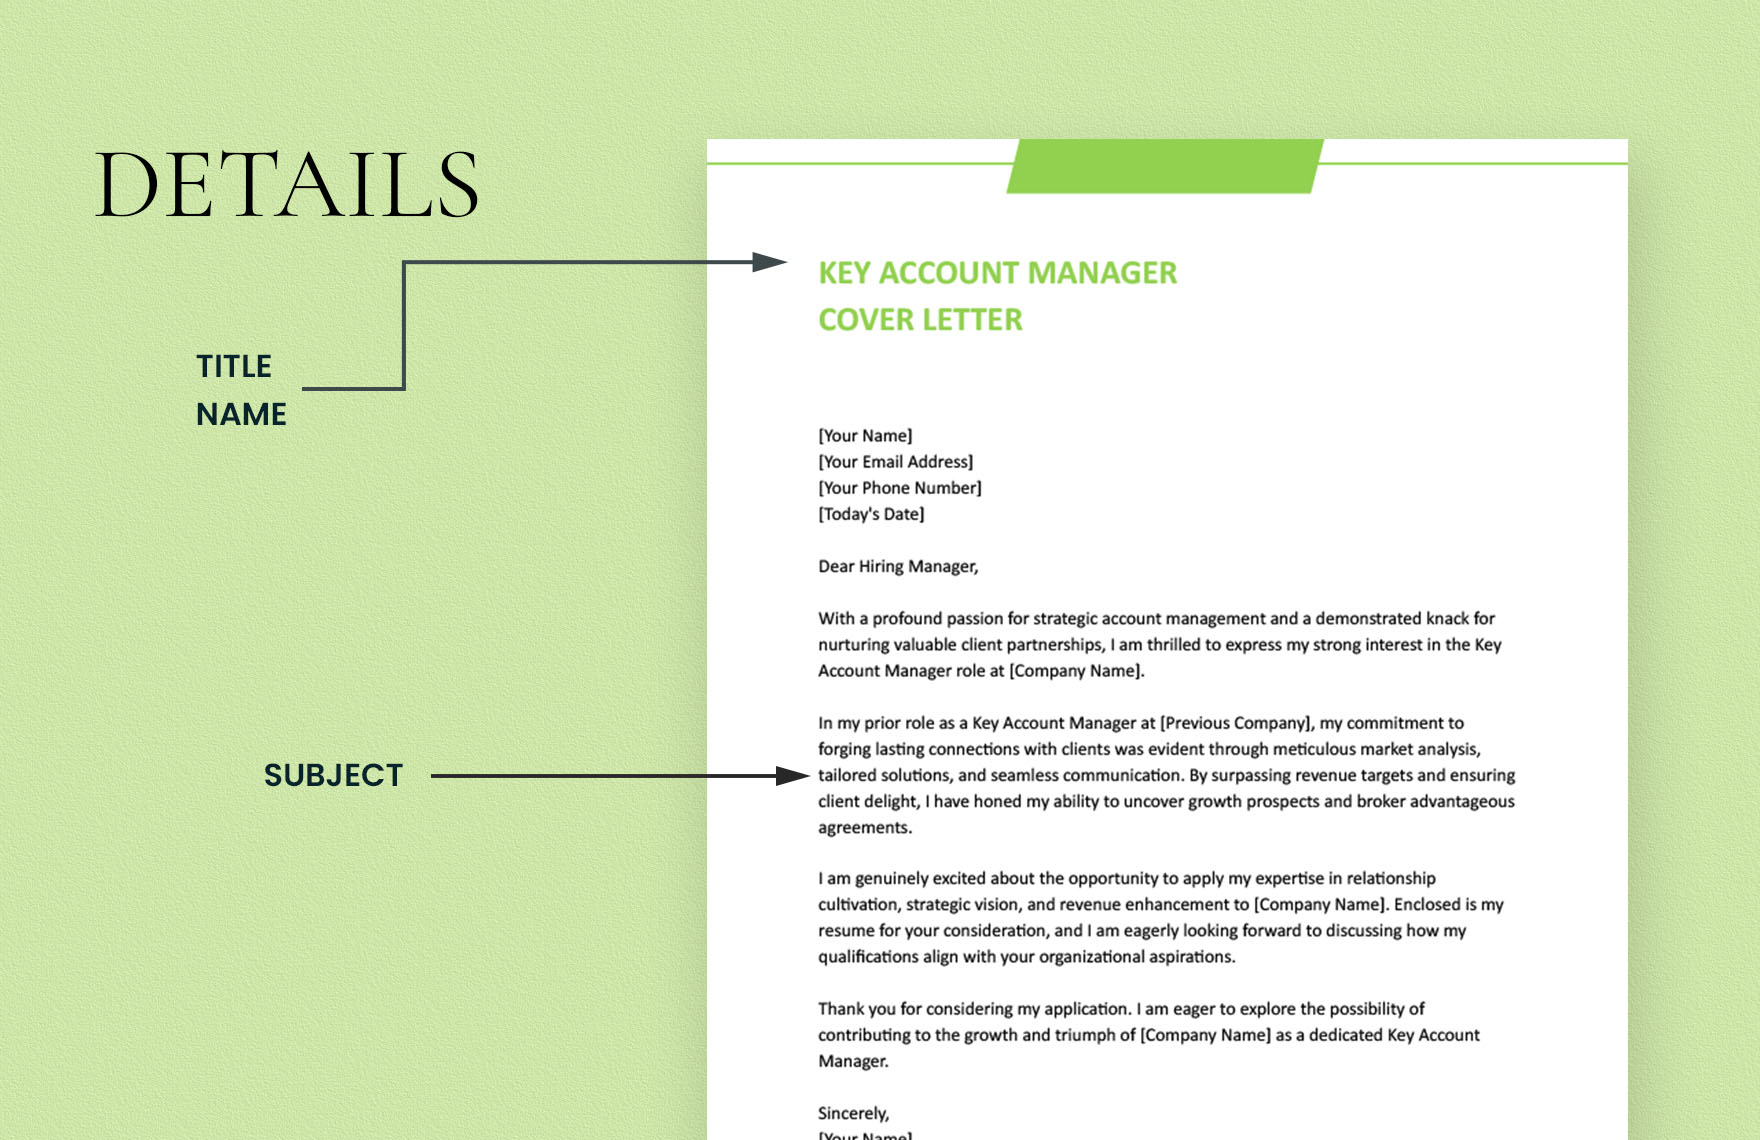 Key Account Manager Cover Letter